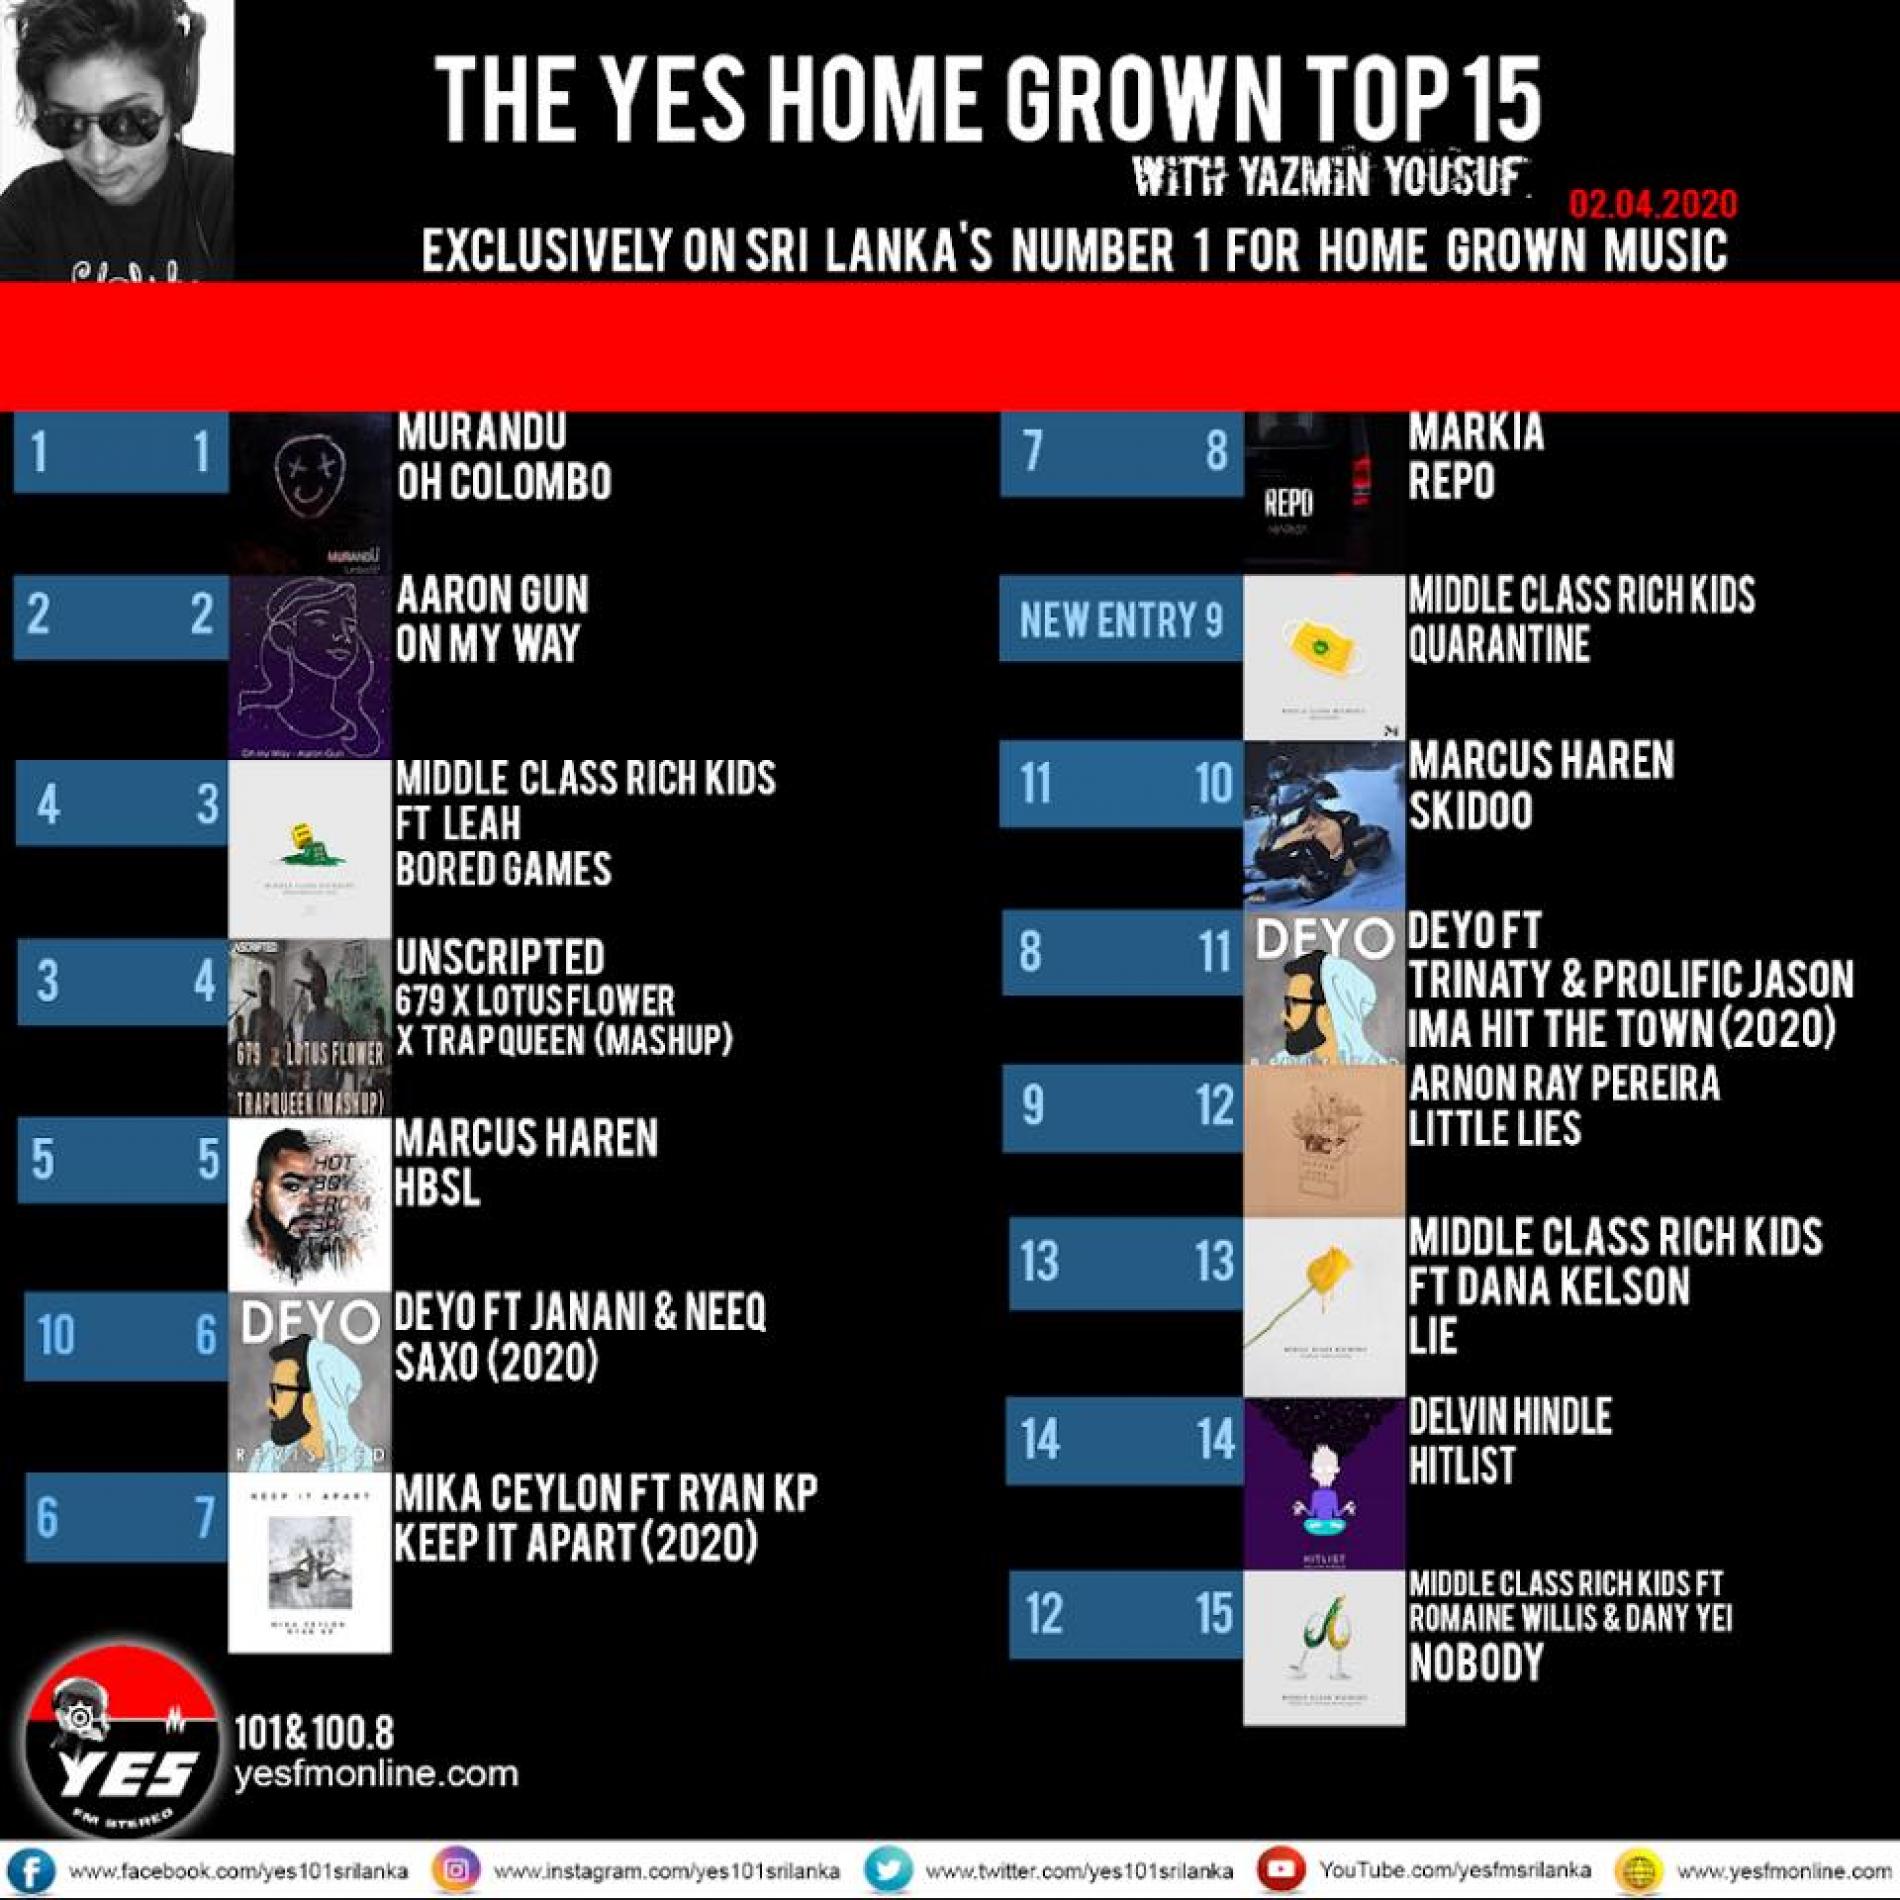 Murandu Sticks Tight For Another Week On The YES Home Grow Top 15 @ Number 1!